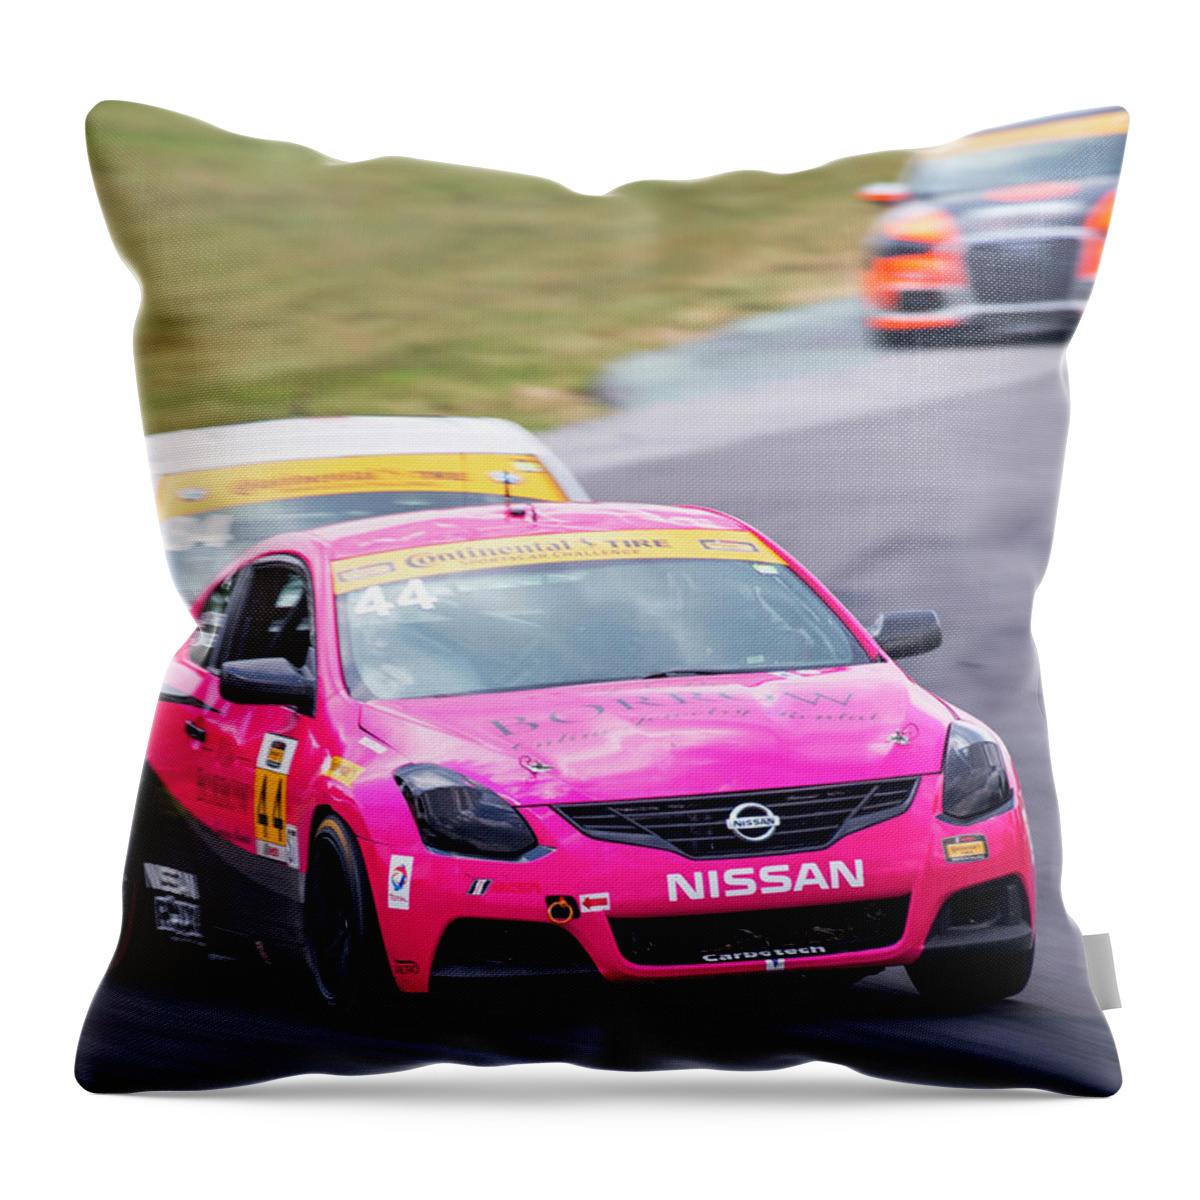 Nissan Throw Pillow featuring the photograph Nissan 44 Cattaneo Trinkler by Alan Raasch